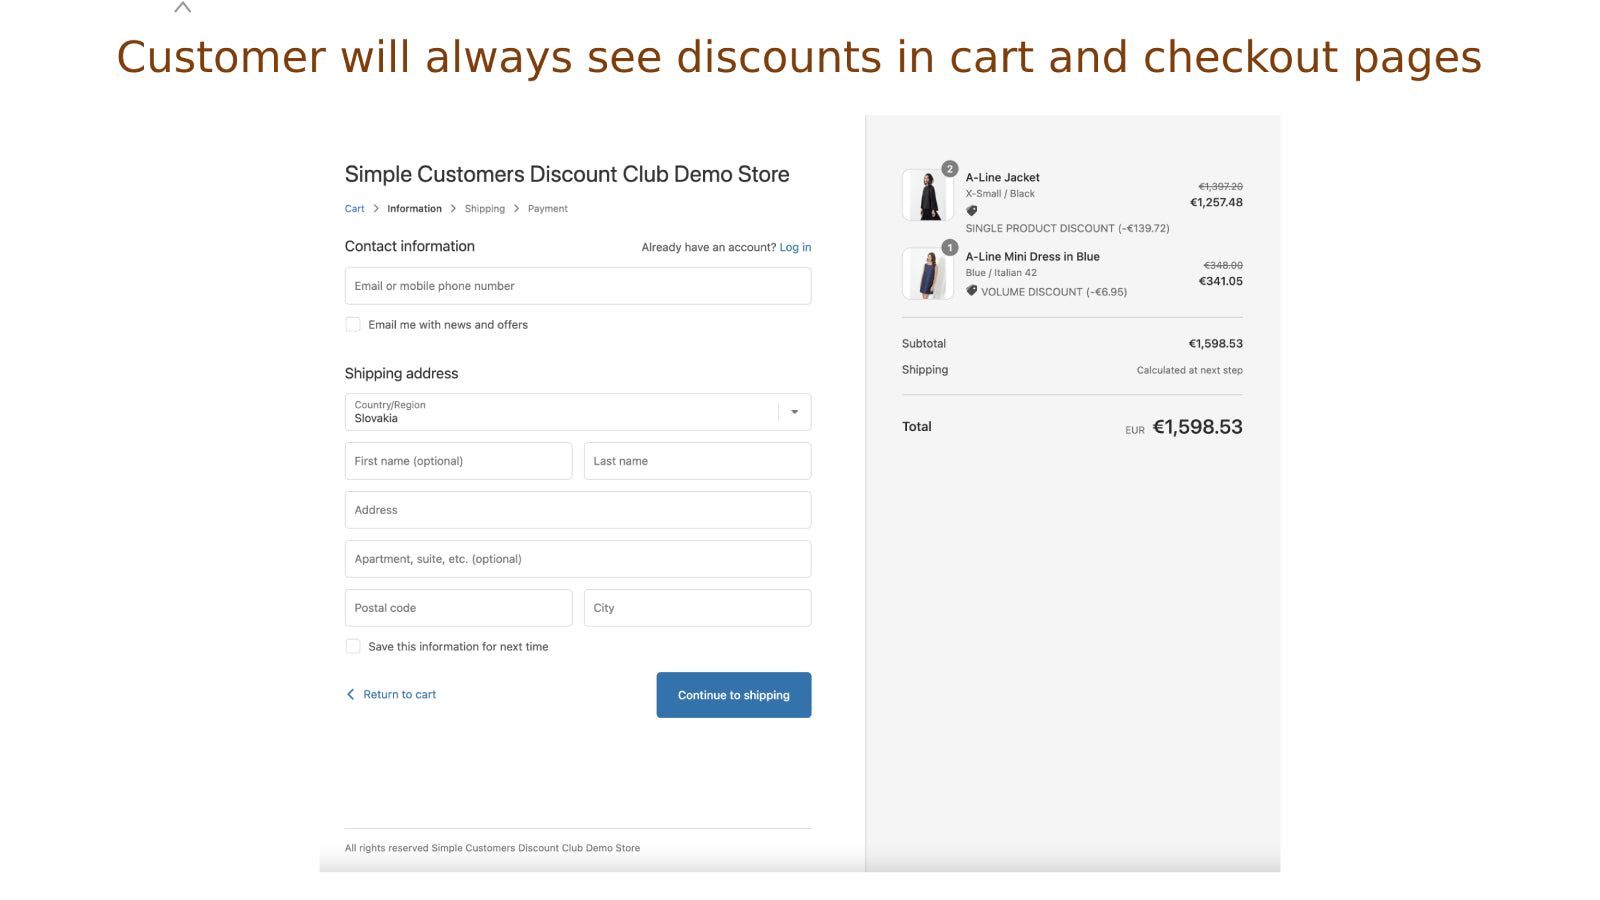 Customer will always see discount in cart and checkout pages